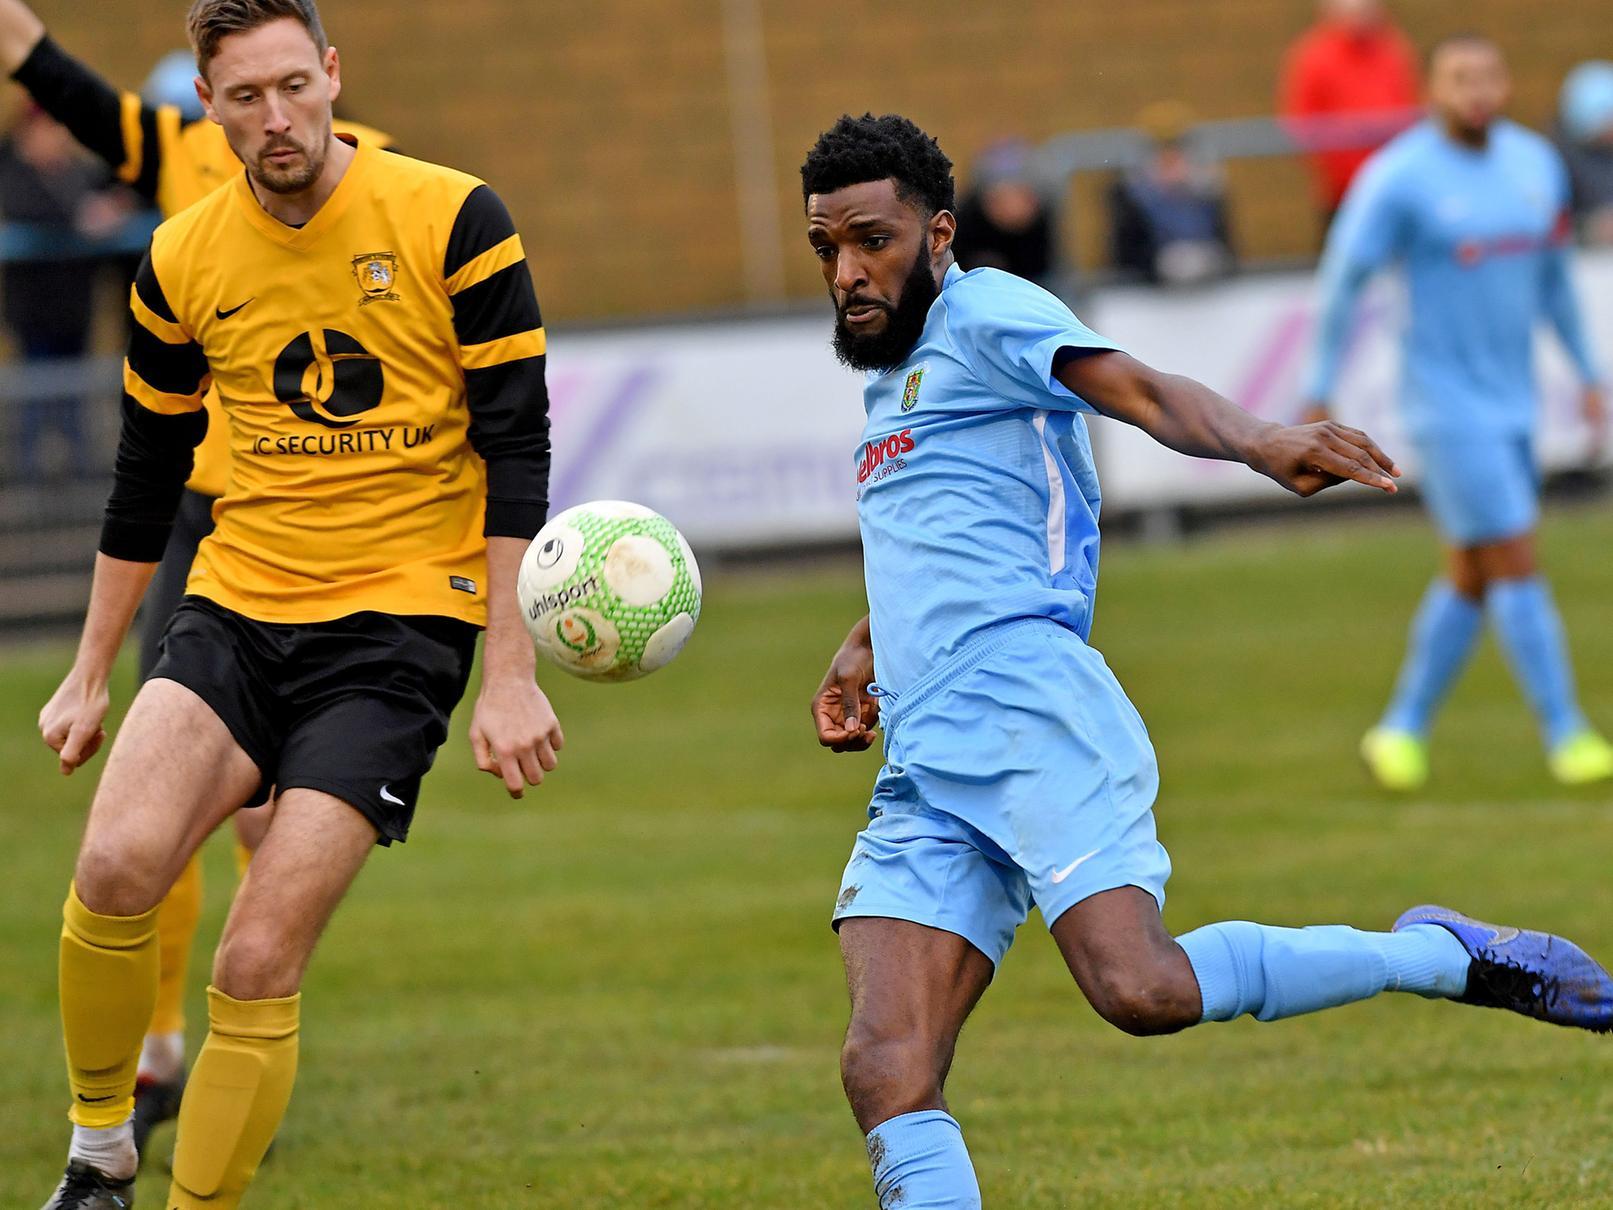 Liam Francis scored Rugby Town's opening goal